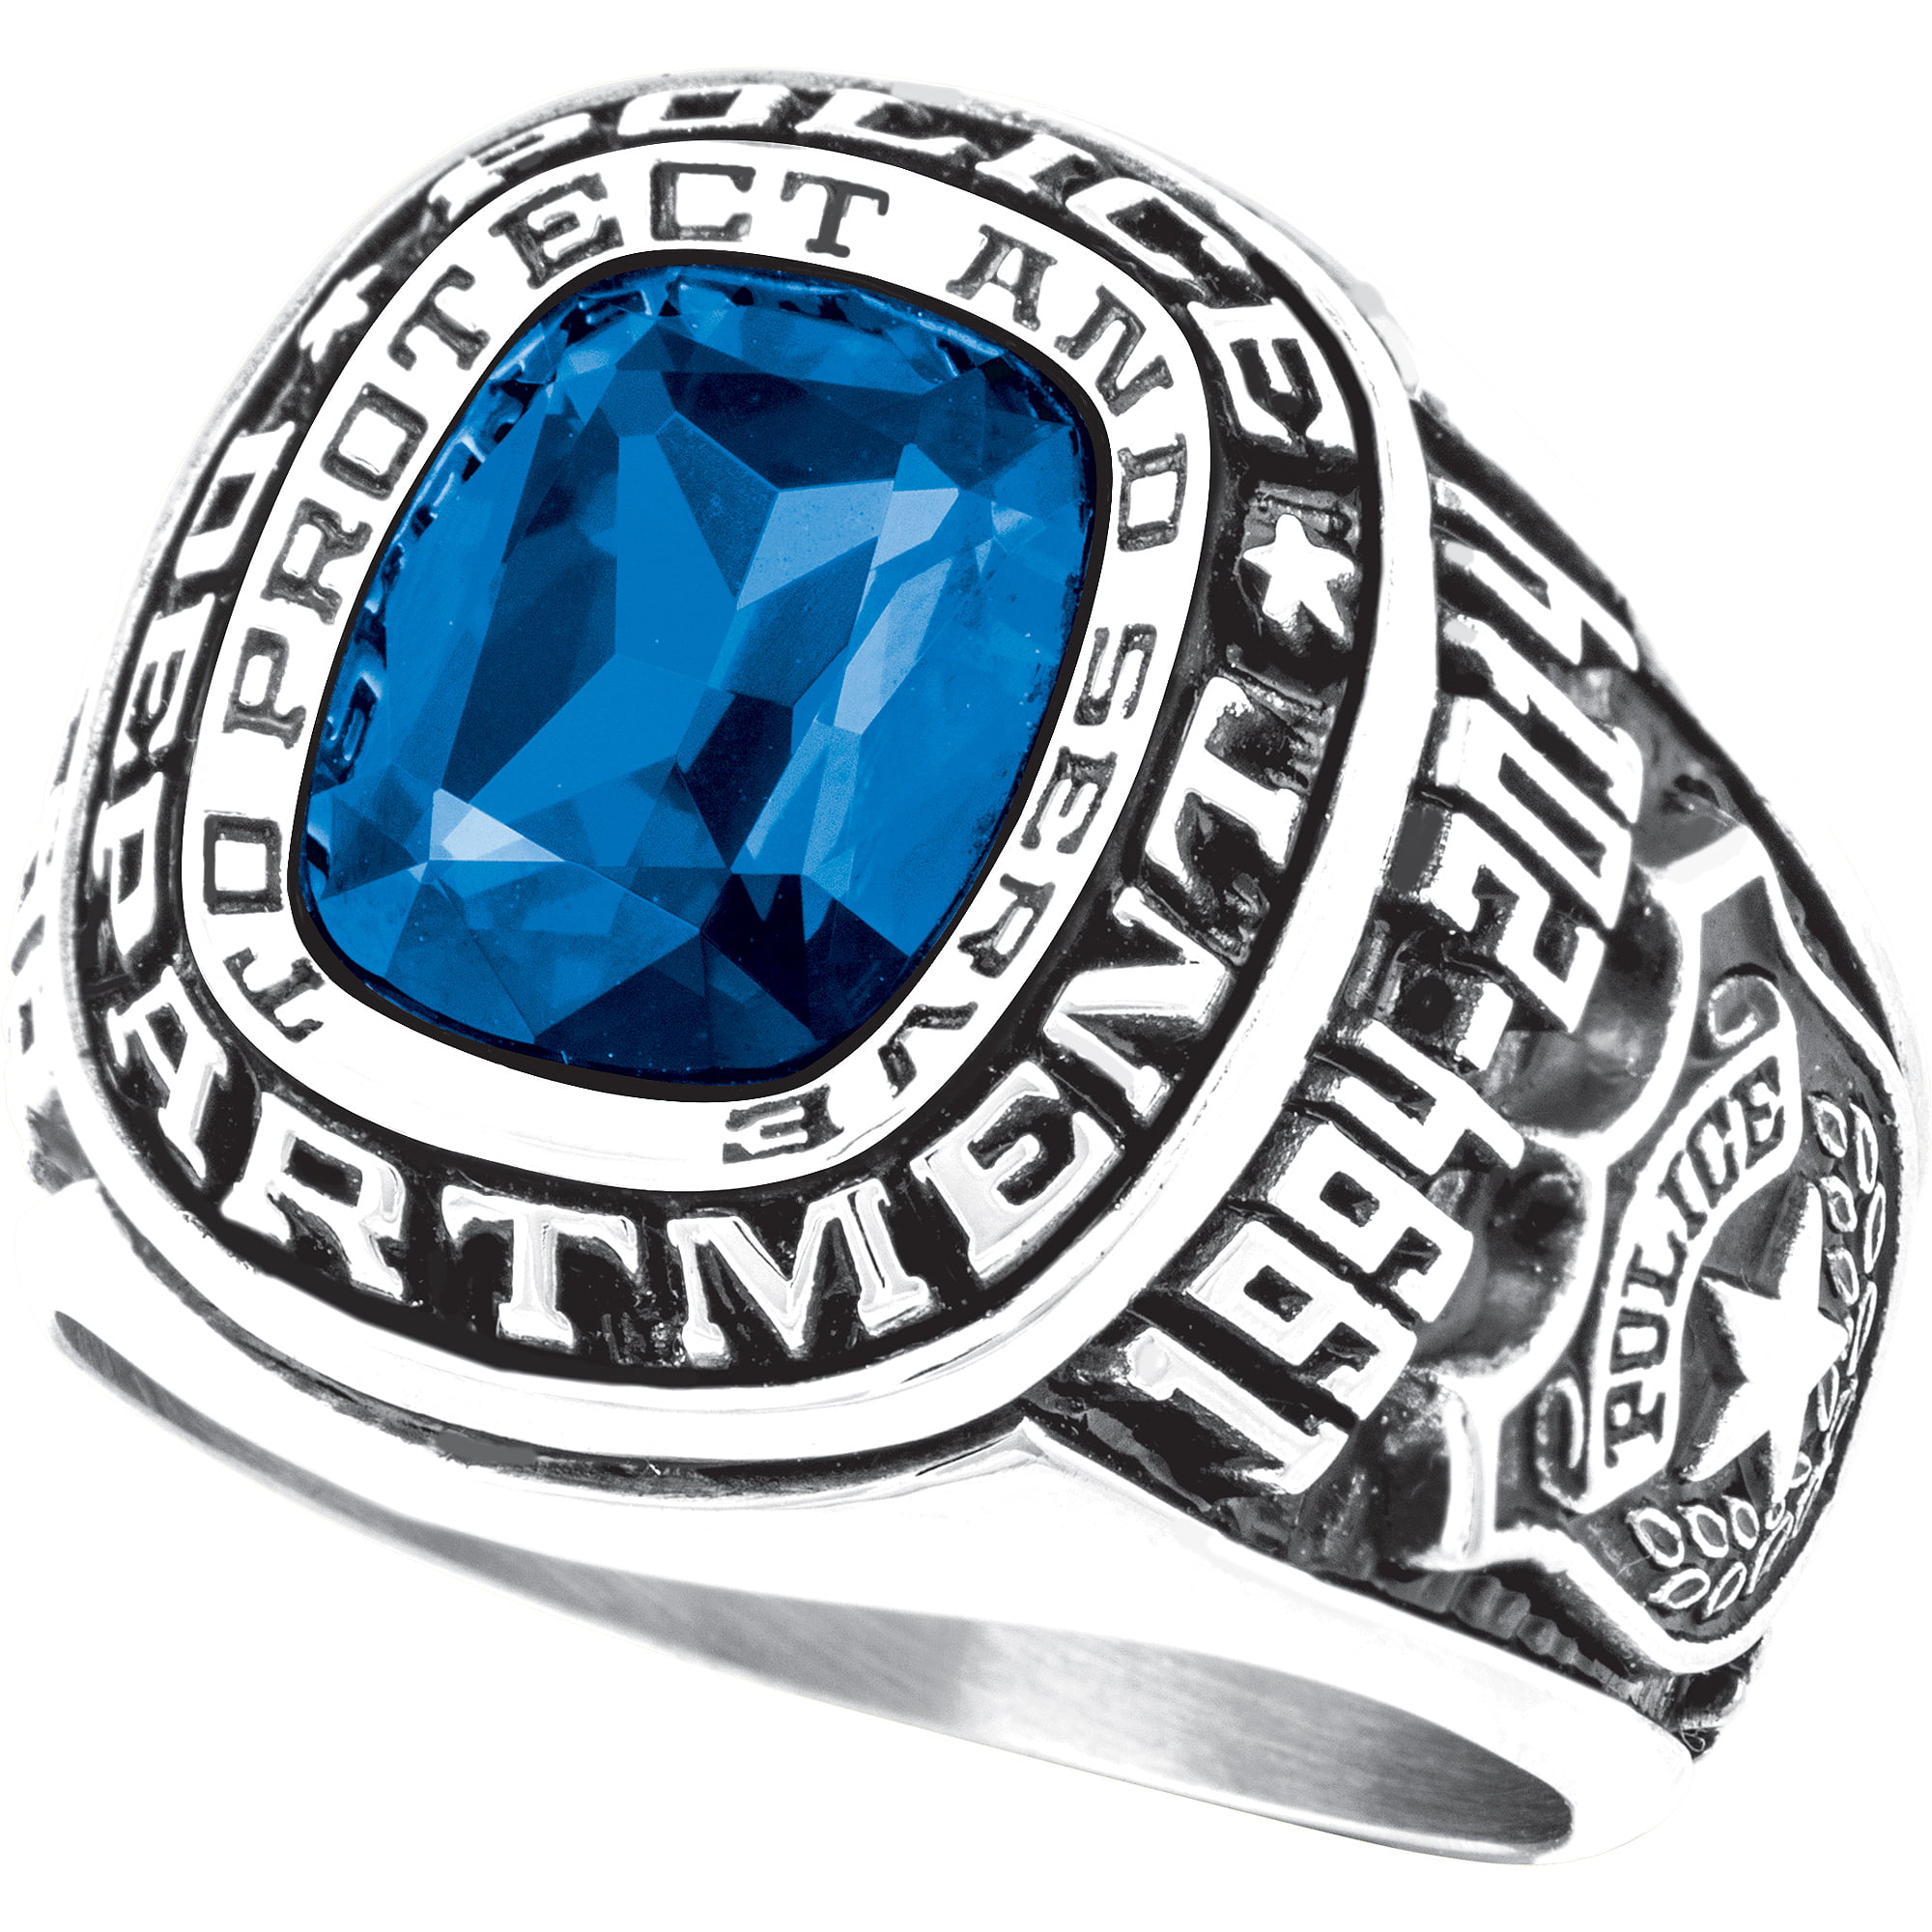 Police Department Ring 